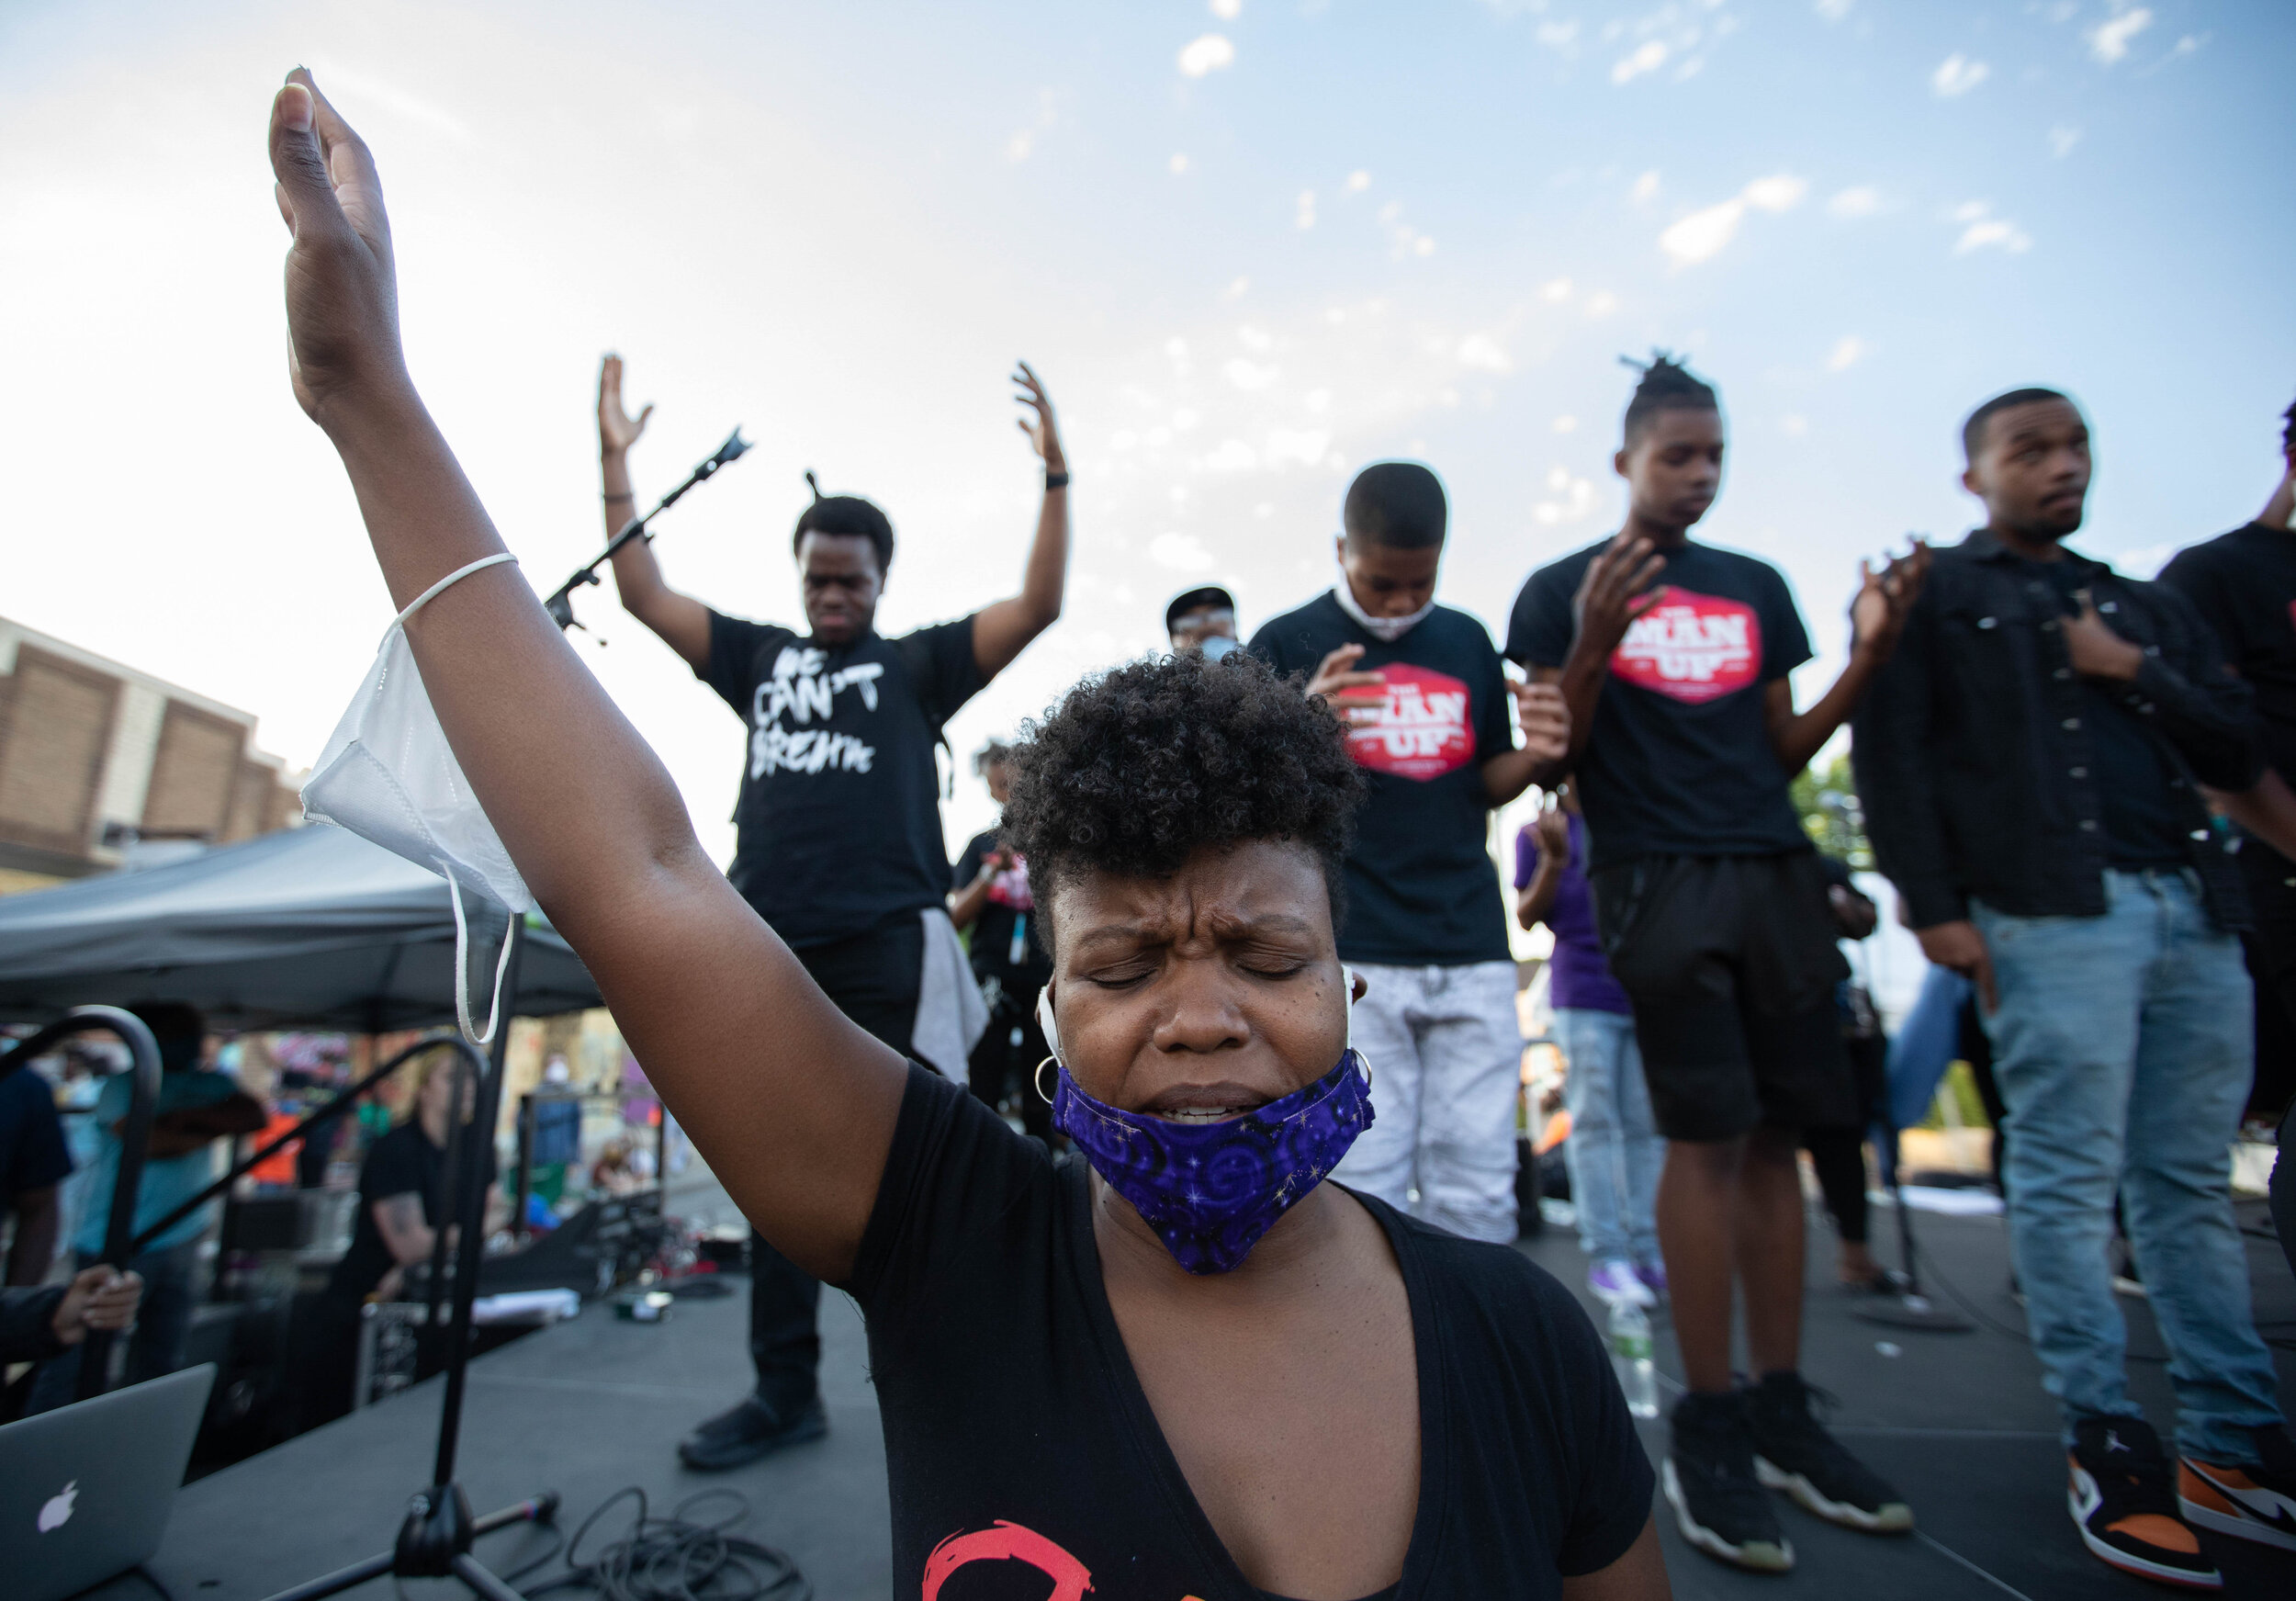  A pastor puts her hand in the air as a group of community members pray together at the memorial site for George Floyd on Chicago Ave in Minneapolis, Minnesota on Jun 14, 2020. 